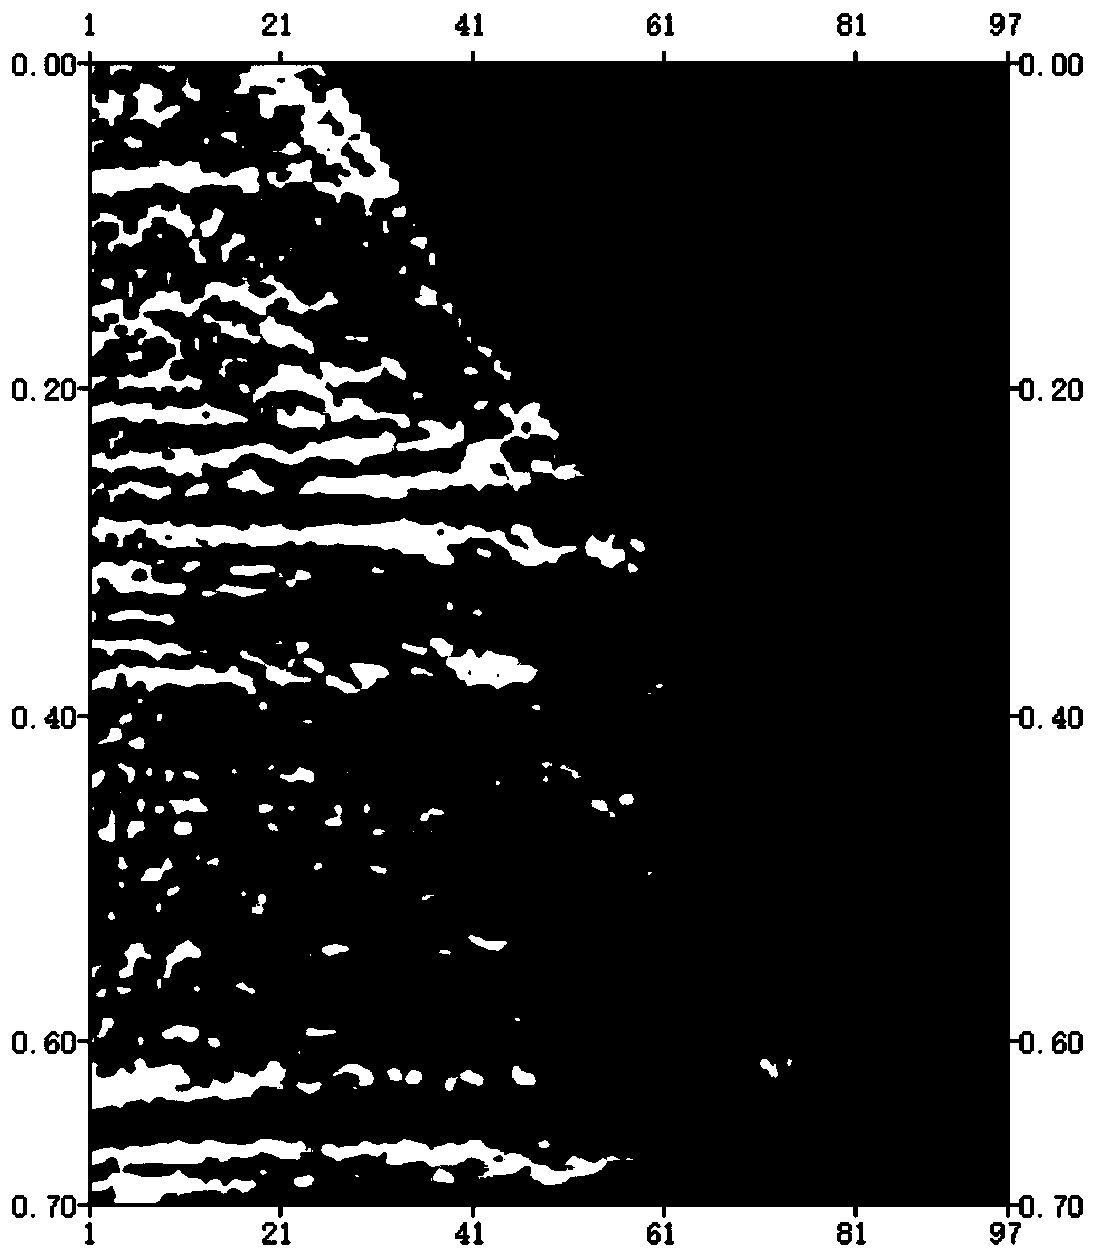 Pre-stack seismic data spectrum expansion method based on angle division processing